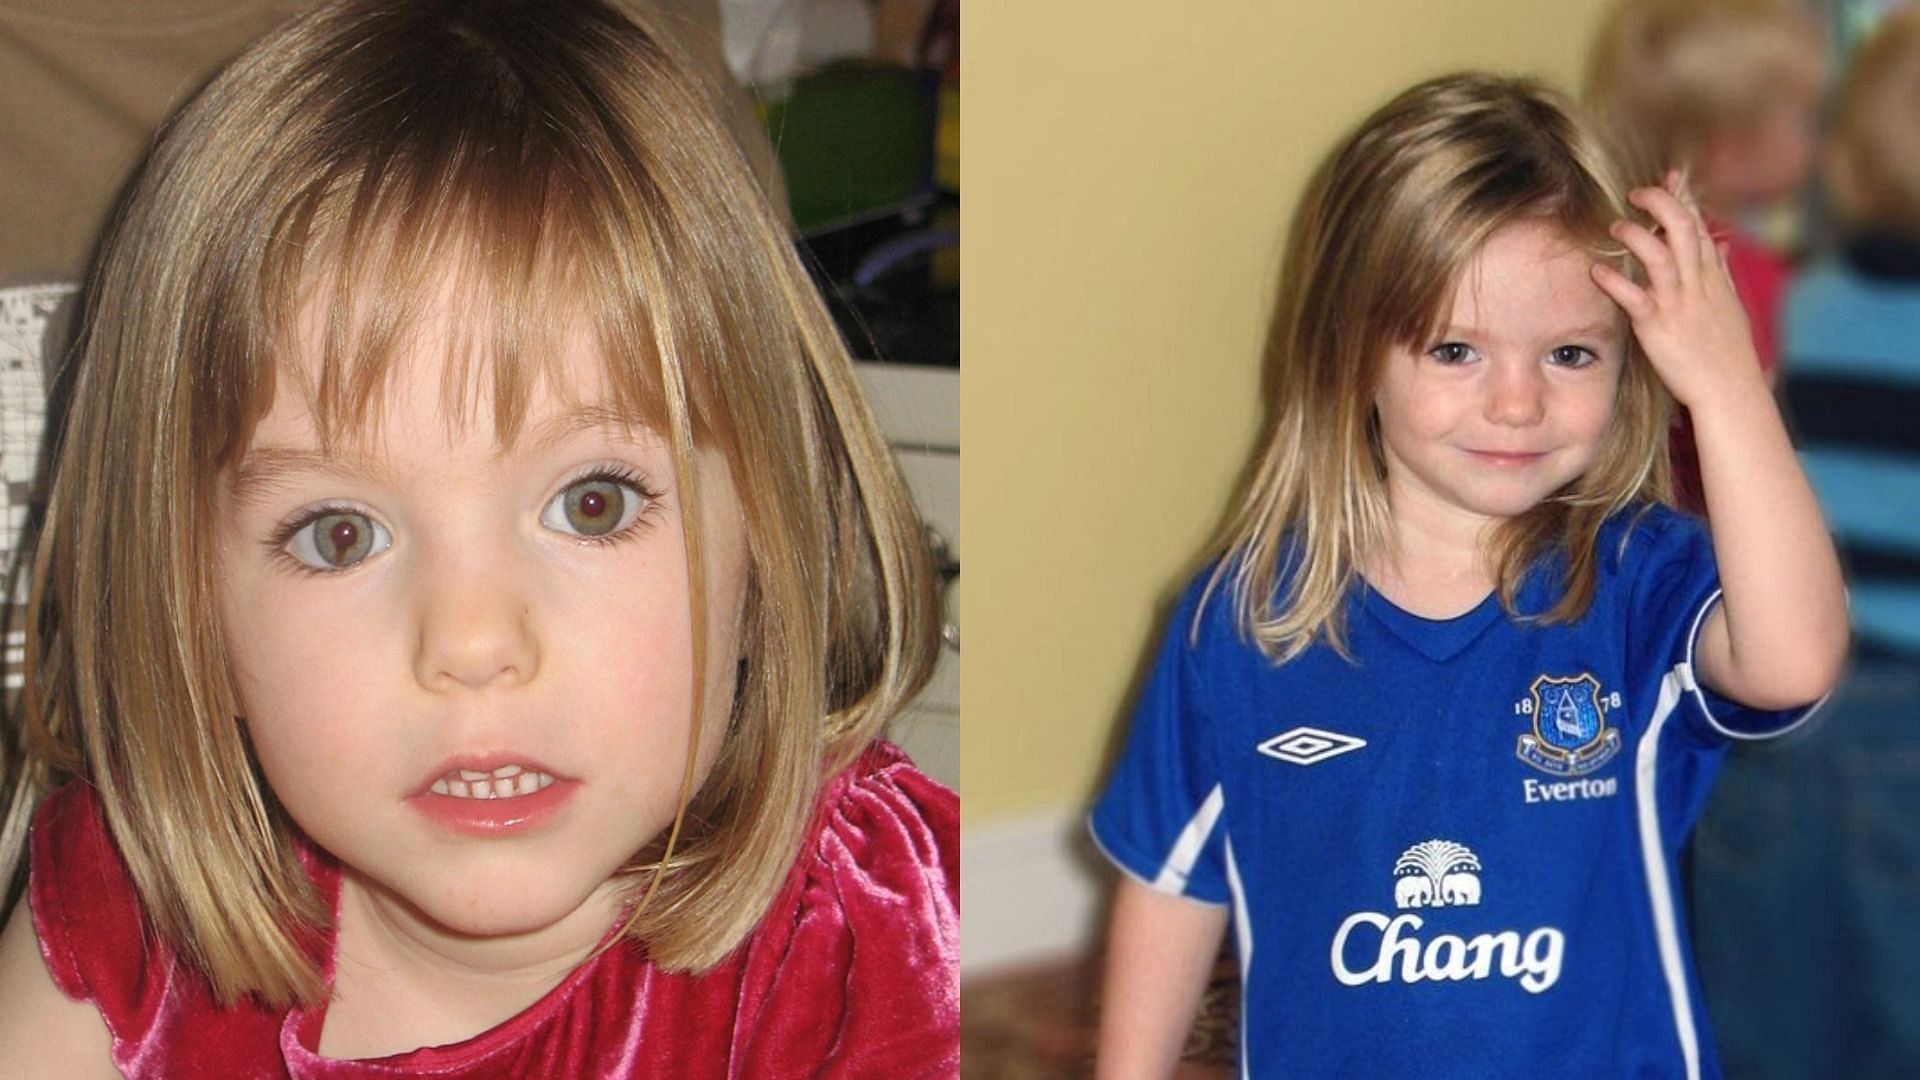 Madeleine McCann&#039;s suspect identified nearly 15 years after her disappearance (Image via Andy Vermaut/Twitter and RoyalPeter2nd/Twitter)